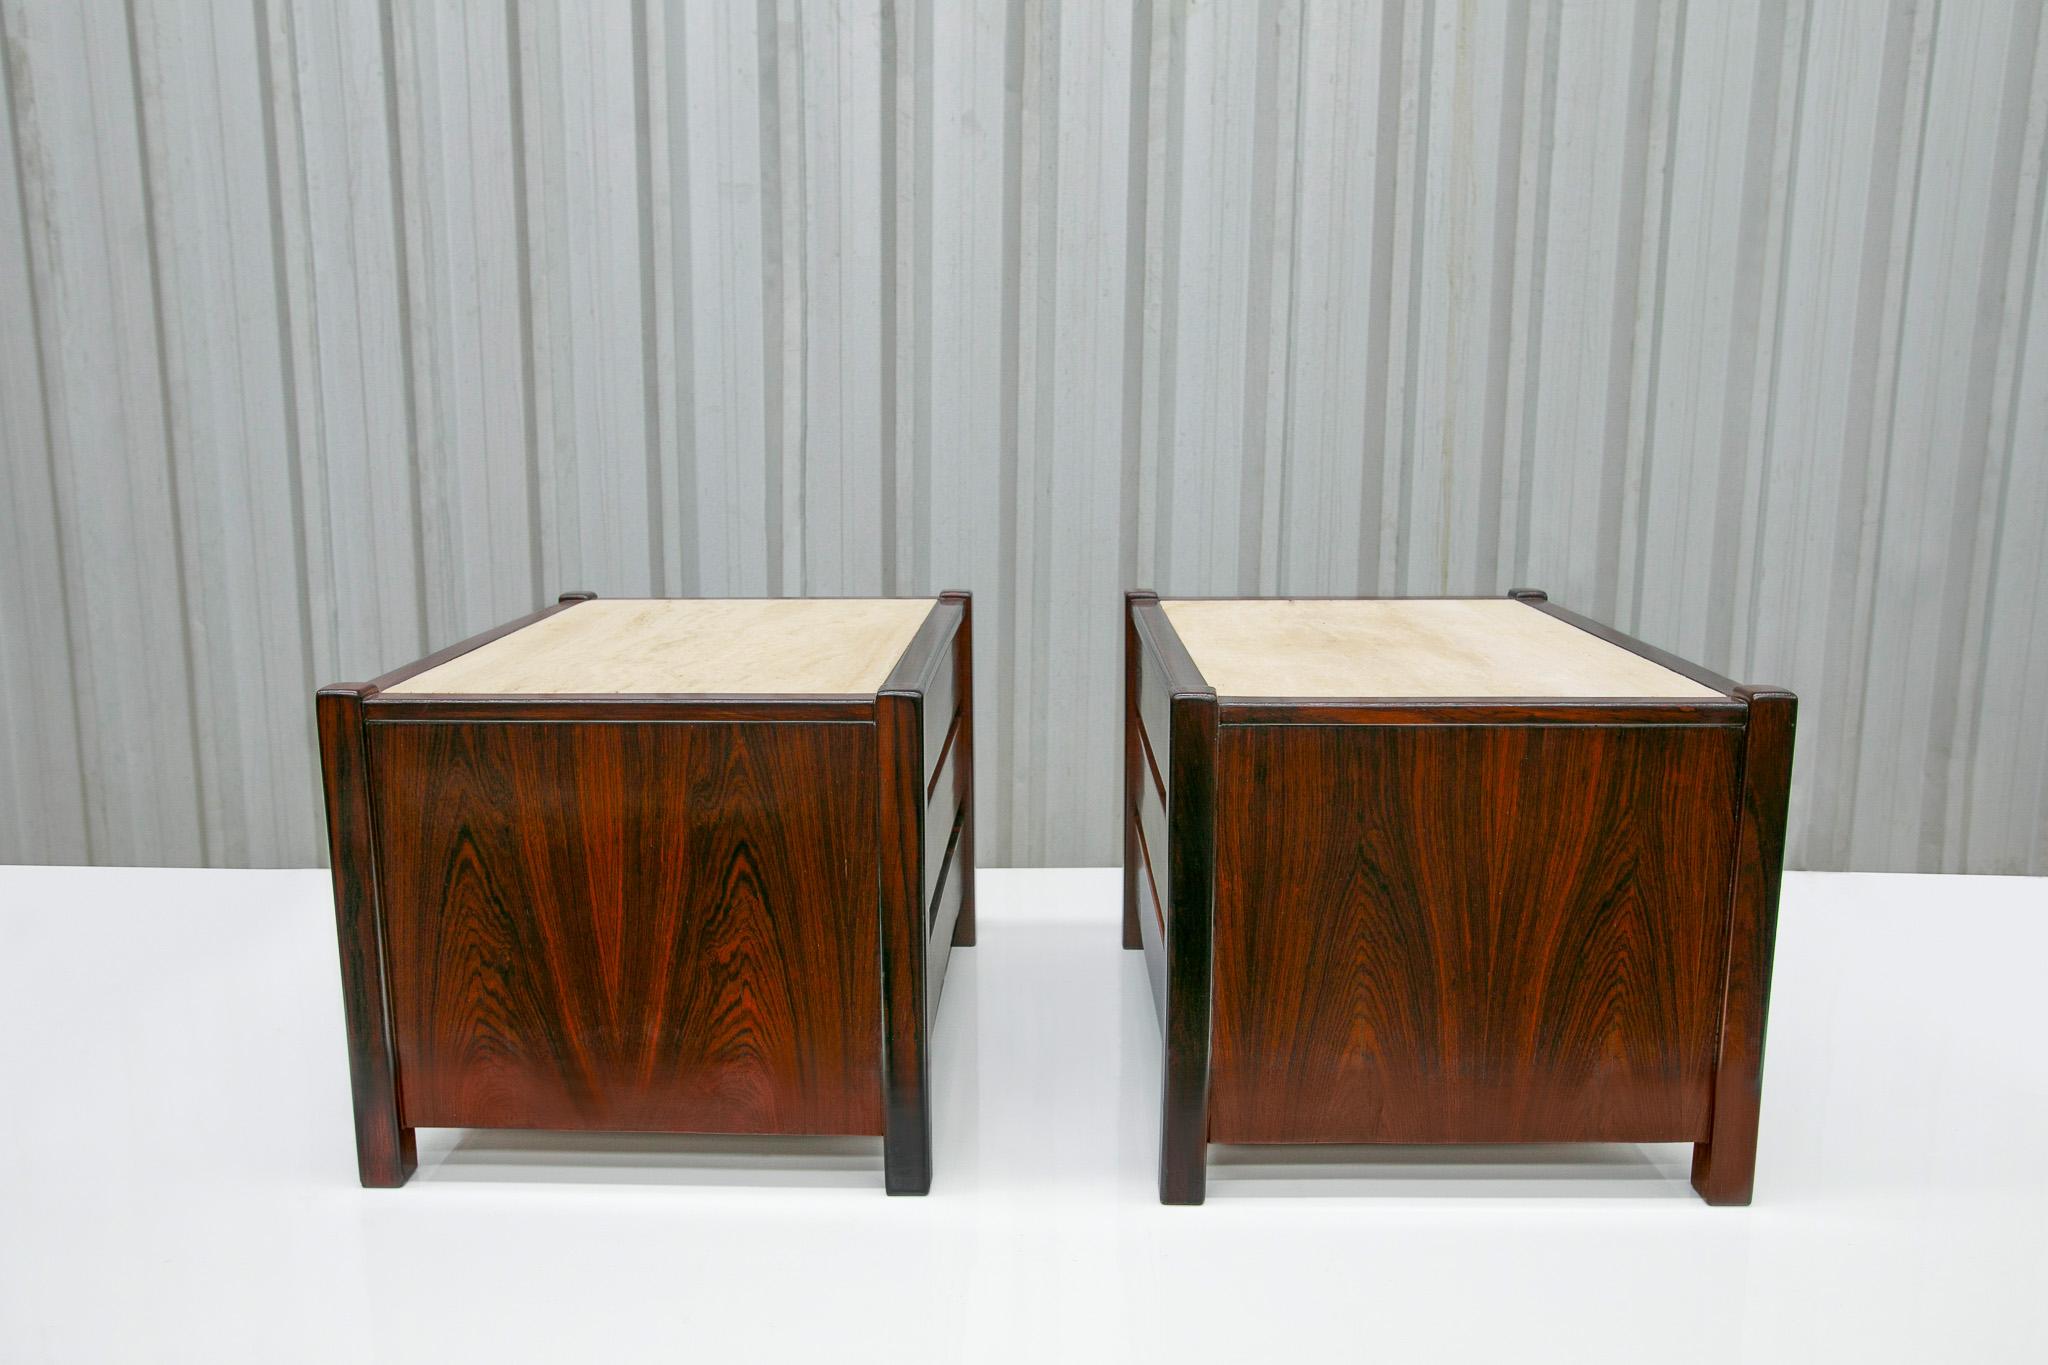 Hand-Carved Brazilian Modern Side Tables Set with Drawers, Travertine & Hardwood by Celina